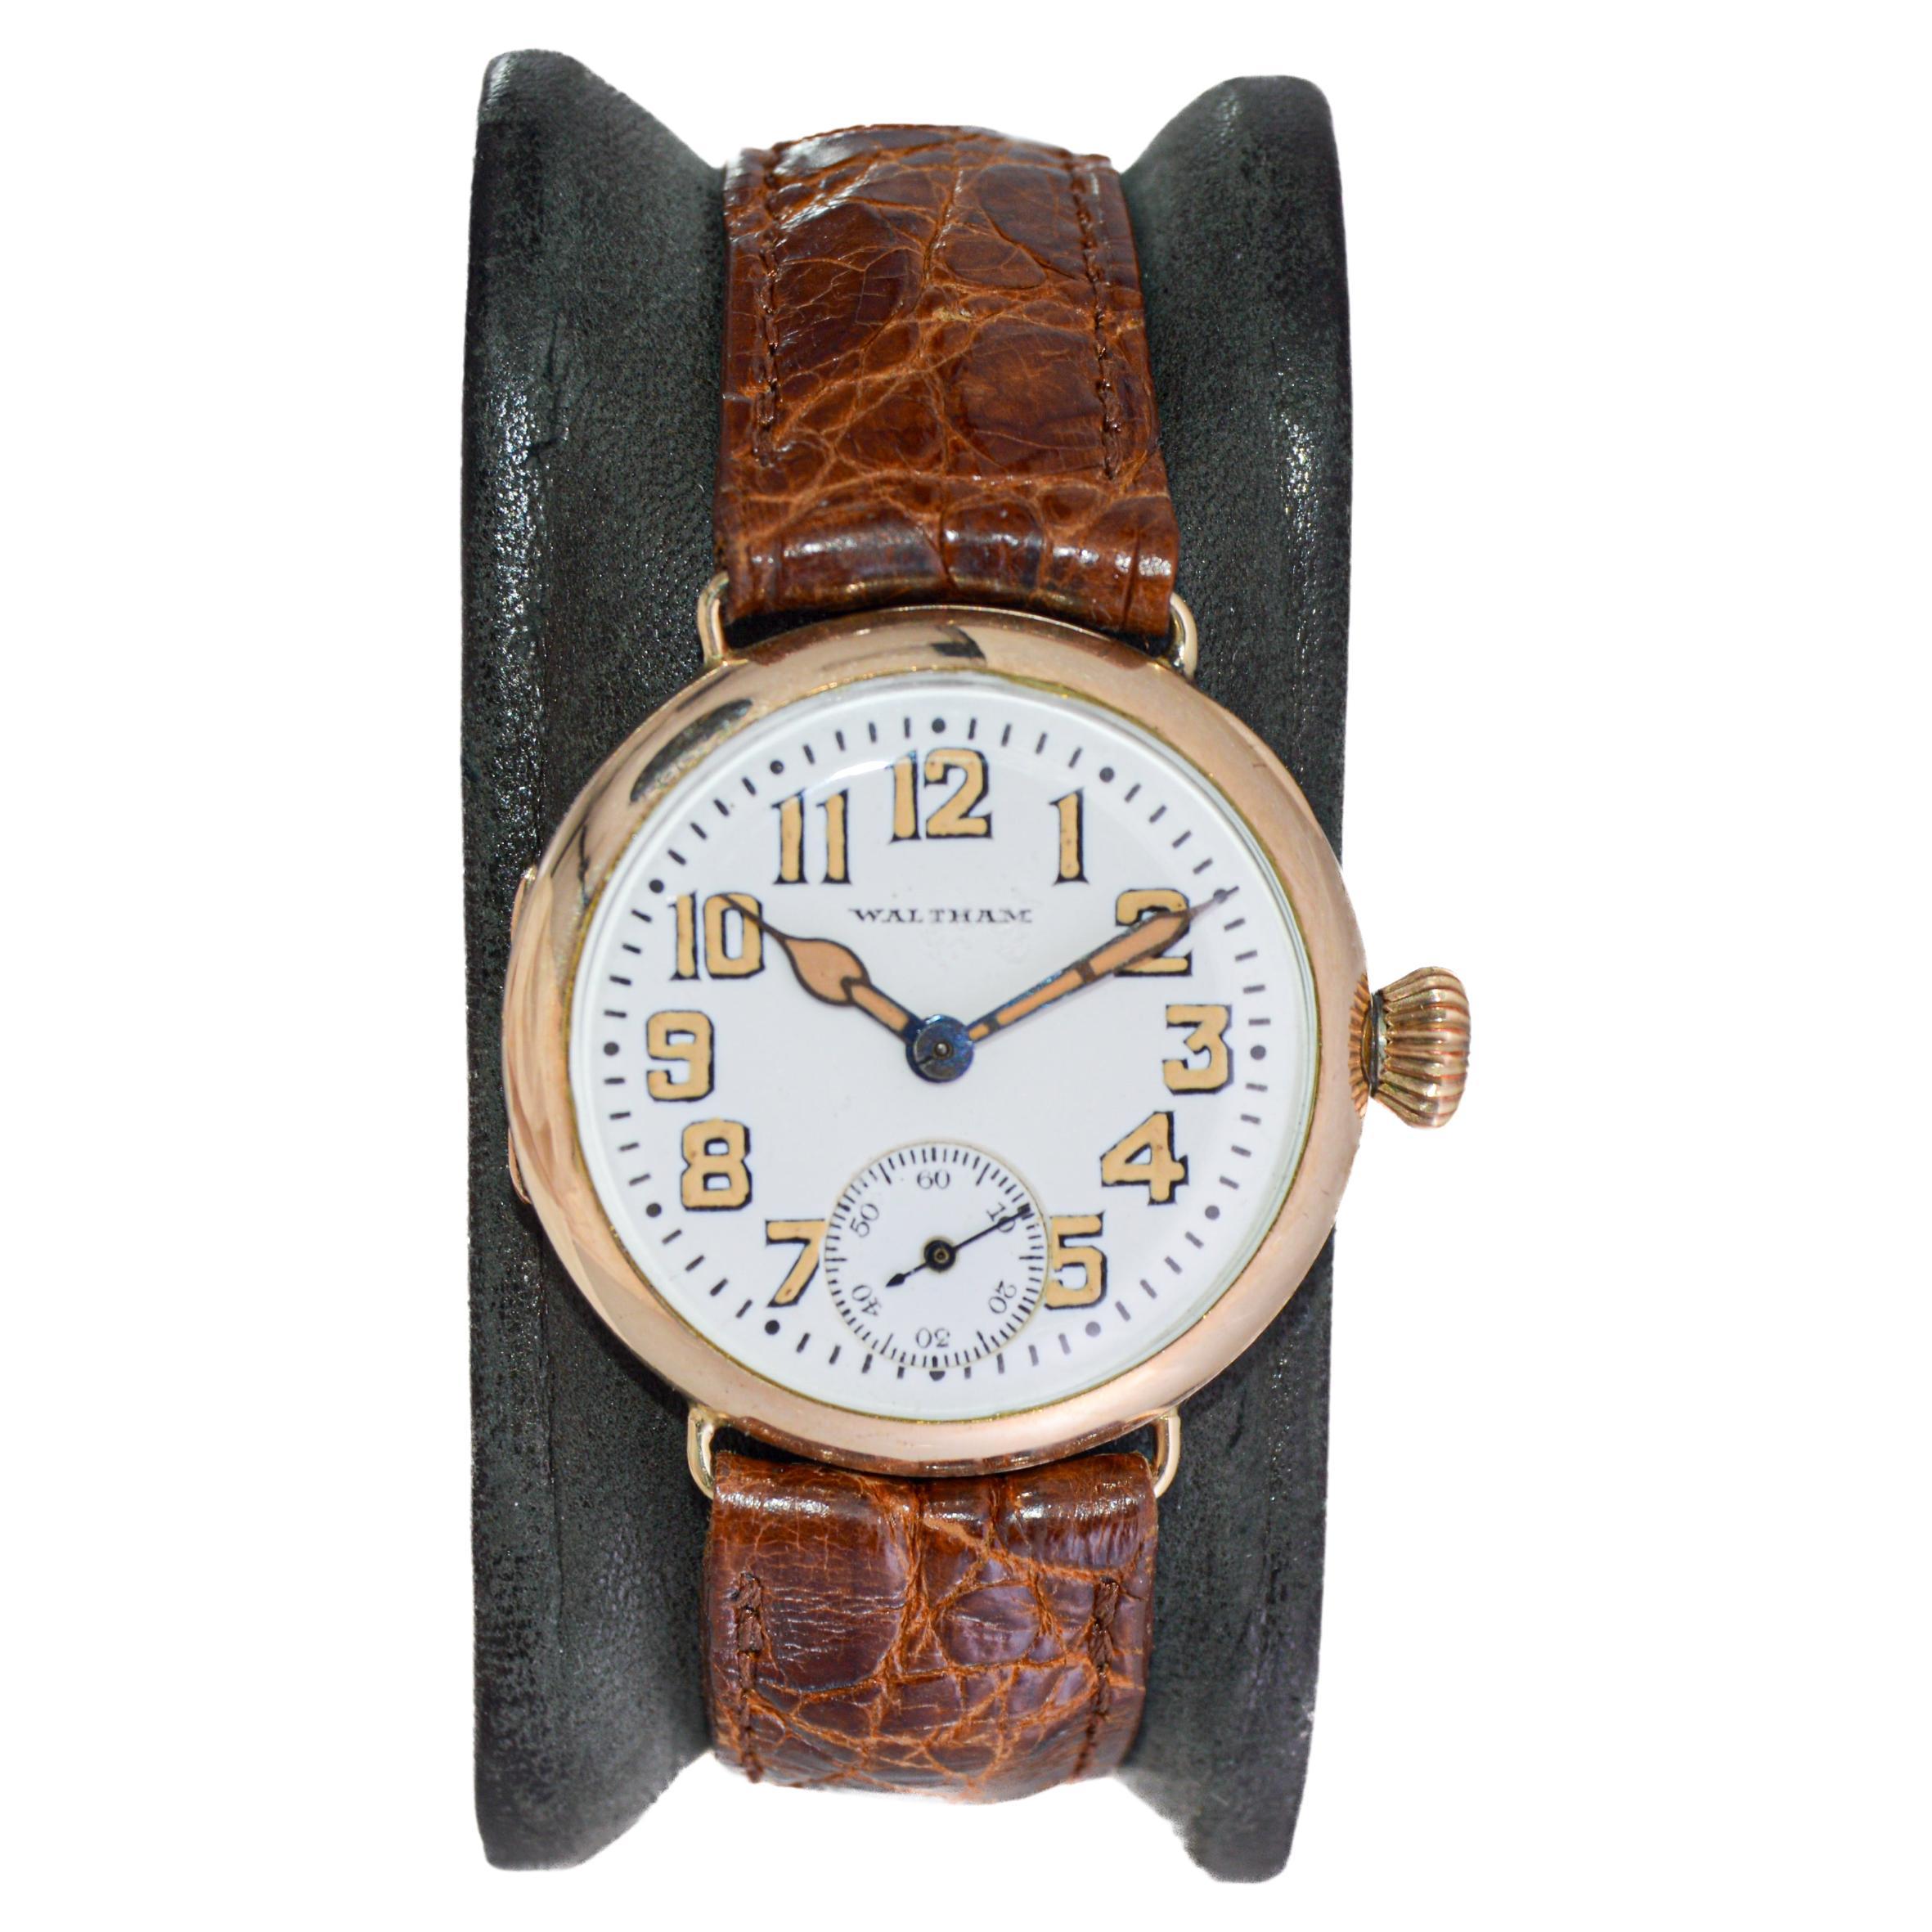 Waltham Gold Filled Campaign Style with Original Flawless Enamel Dial from 